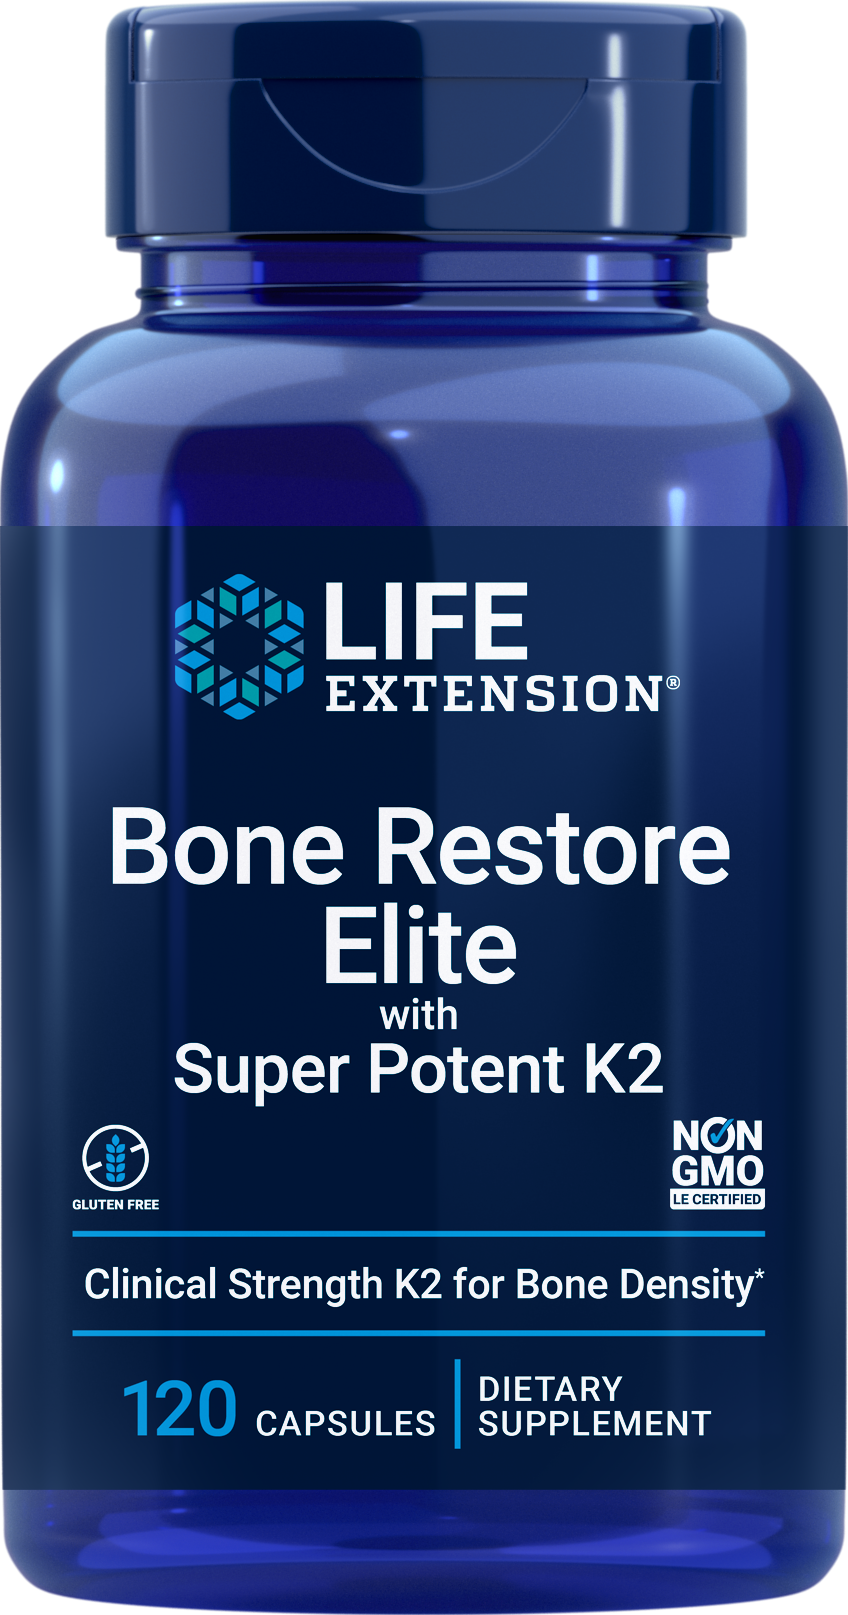 Life Extension launches new bone health formula with vitamin K2